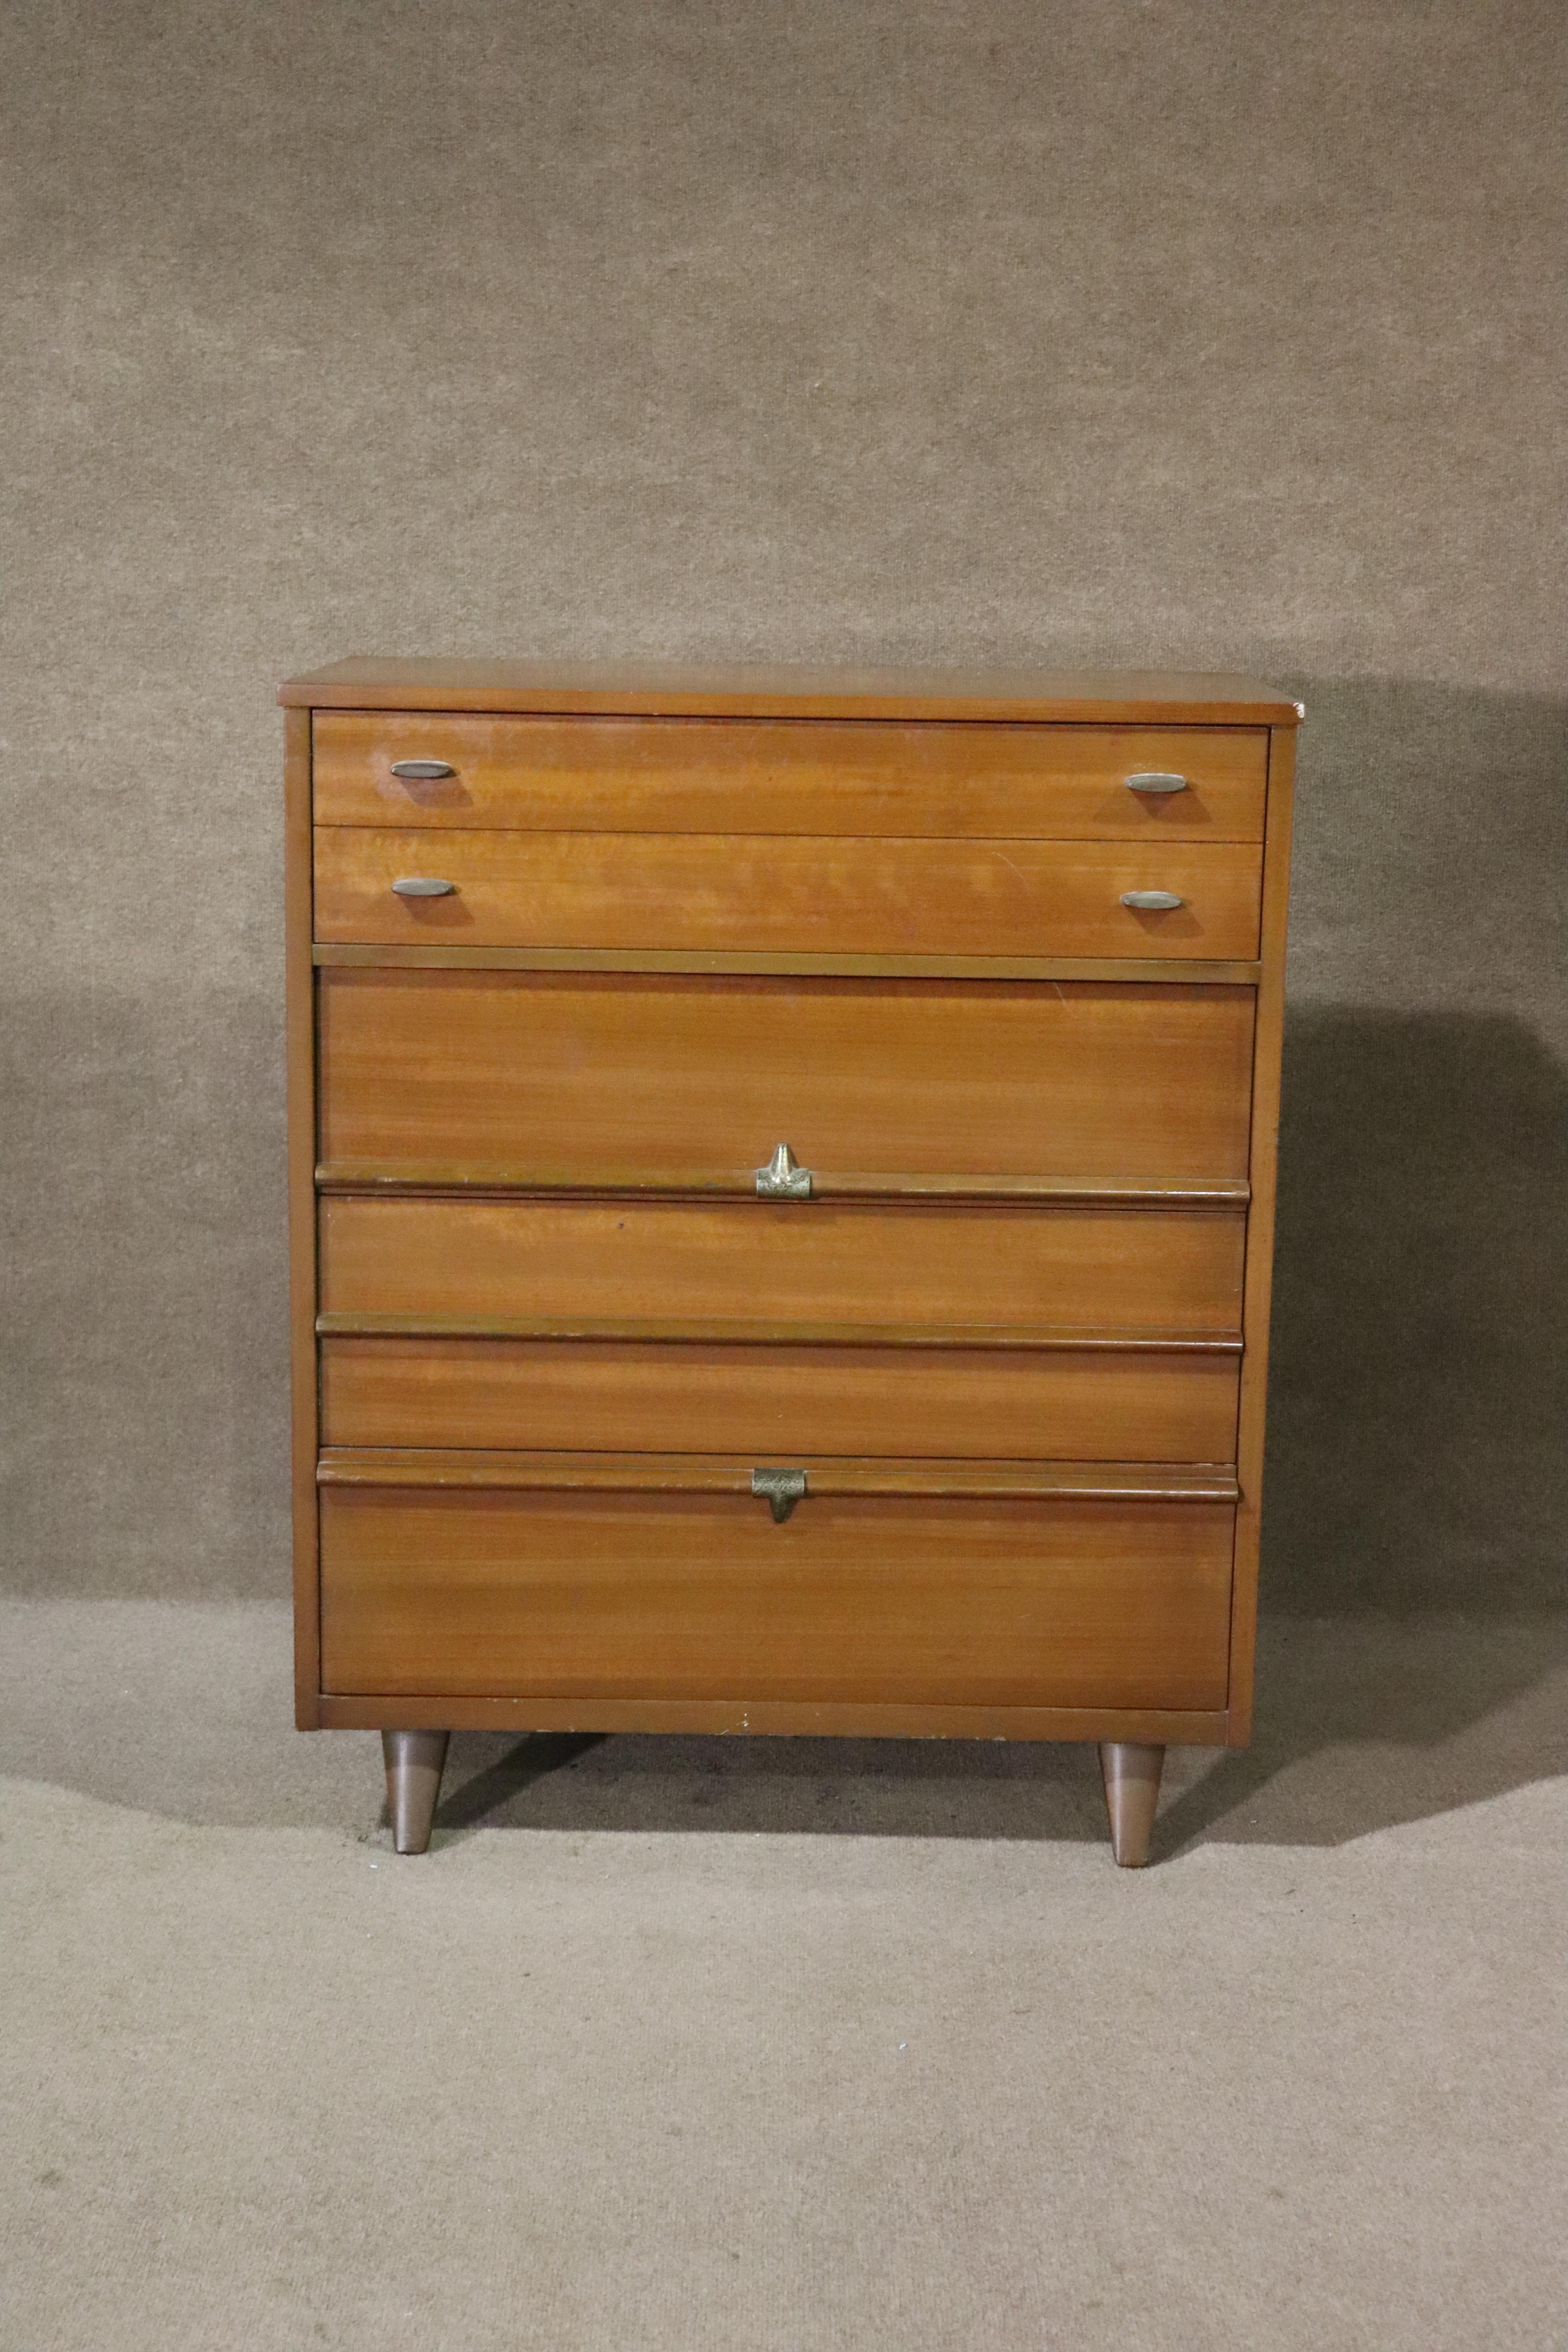 Tall mid-century modern American made dresser with four deep drawers. Walnut grain with metal hardware.
Please confirm location NY or NJ